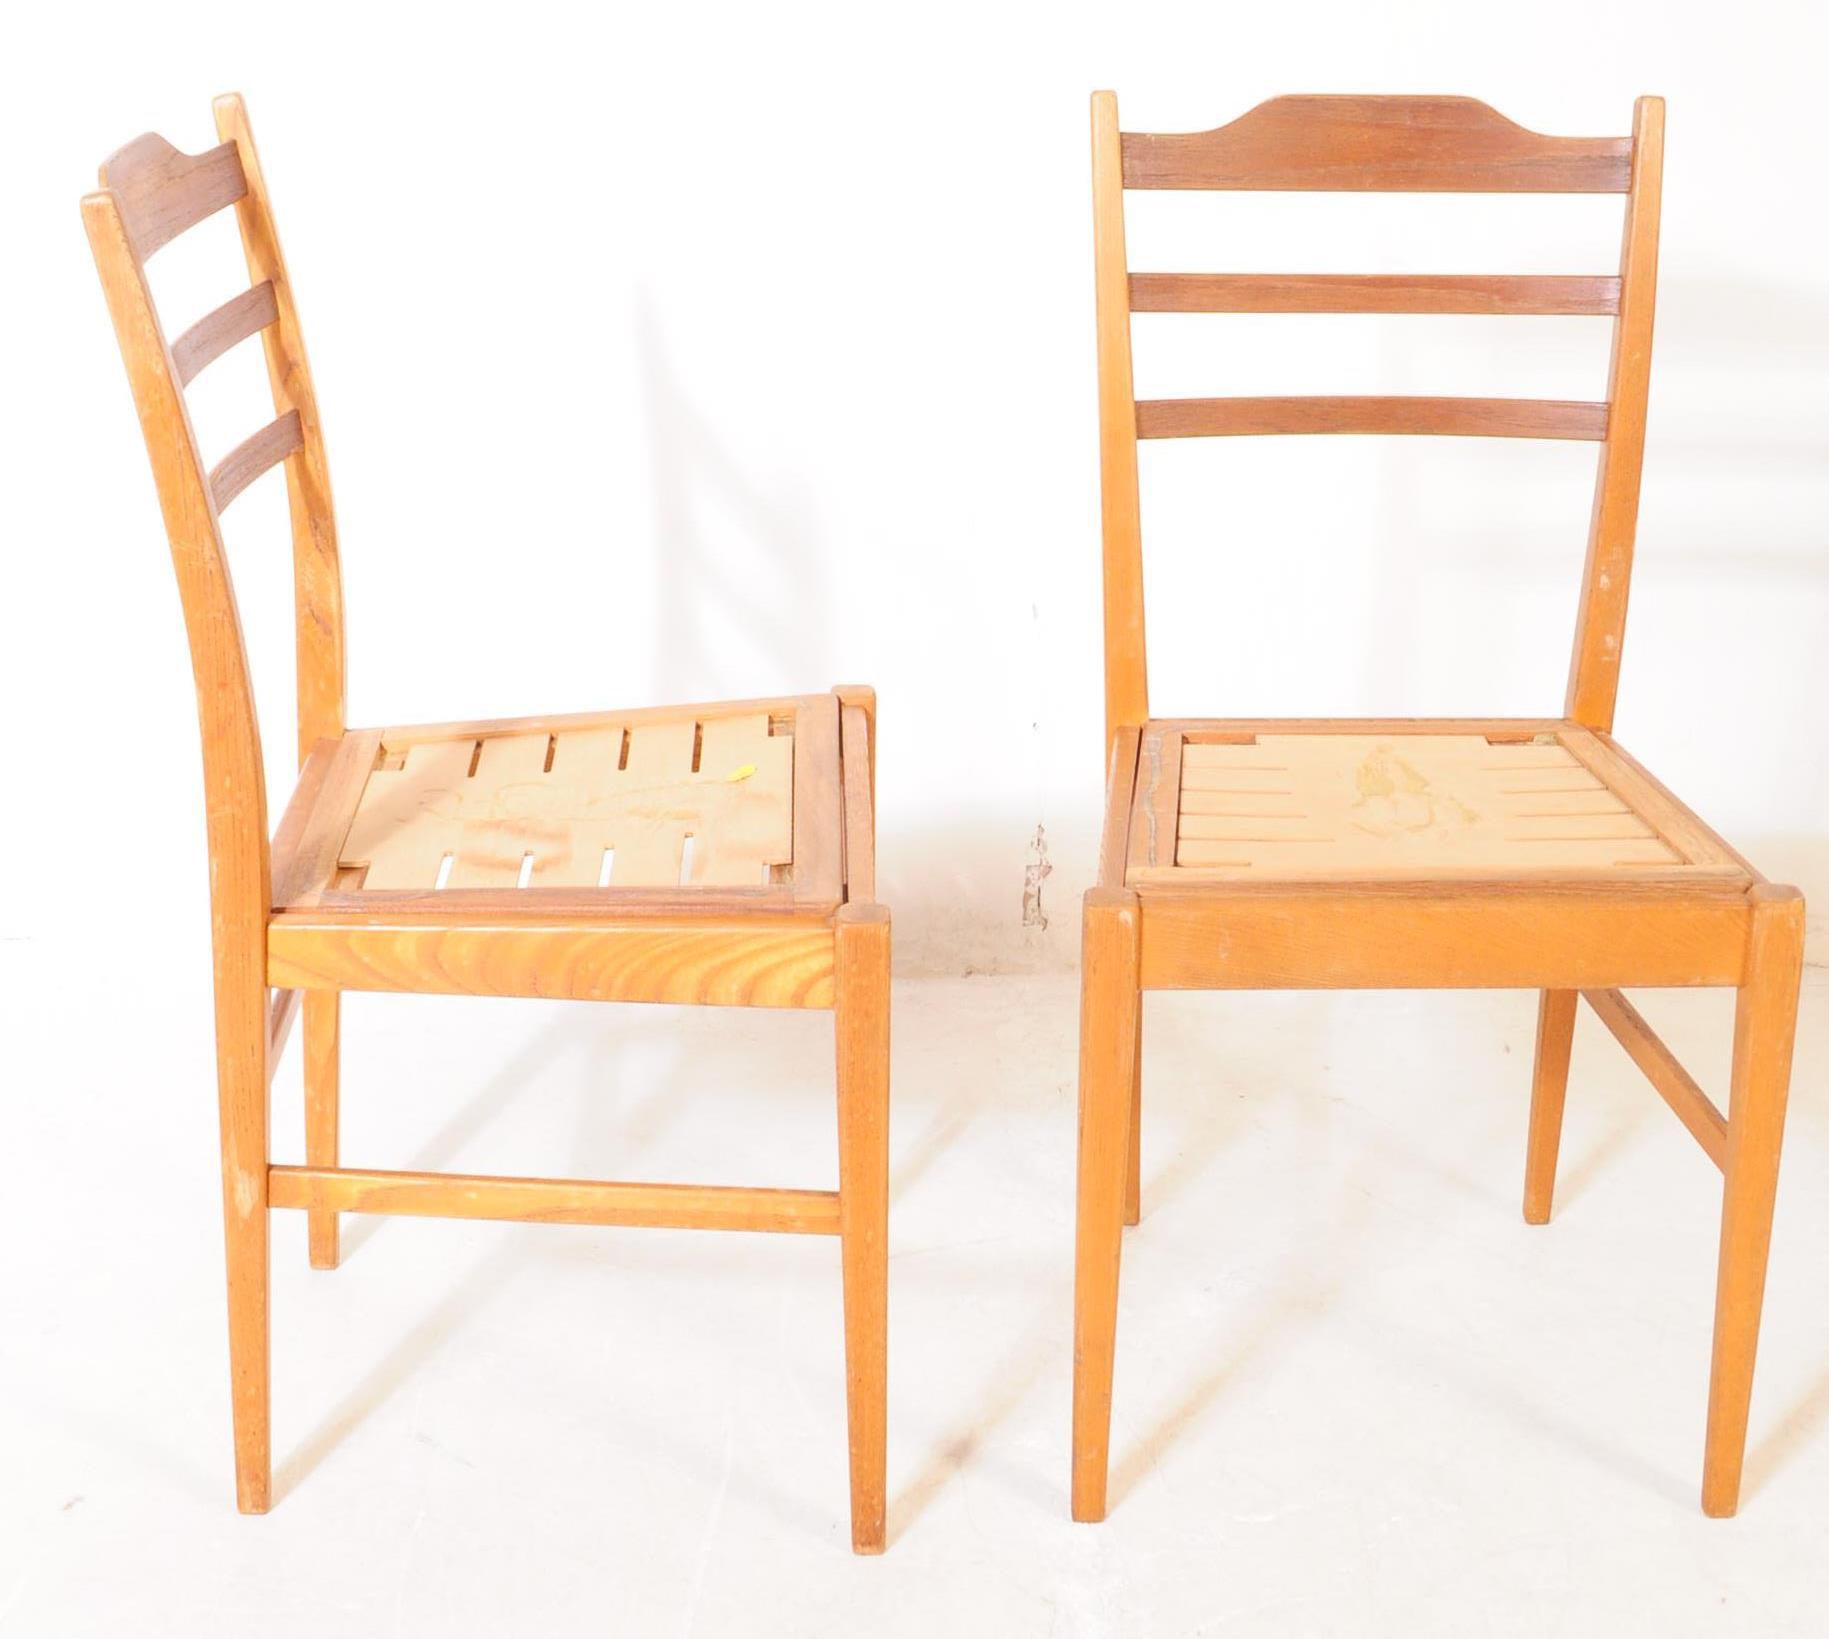 GORDON RUSSELL OF BROADWAY - FOUR RETRO DINING CHAIRS - Image 2 of 5